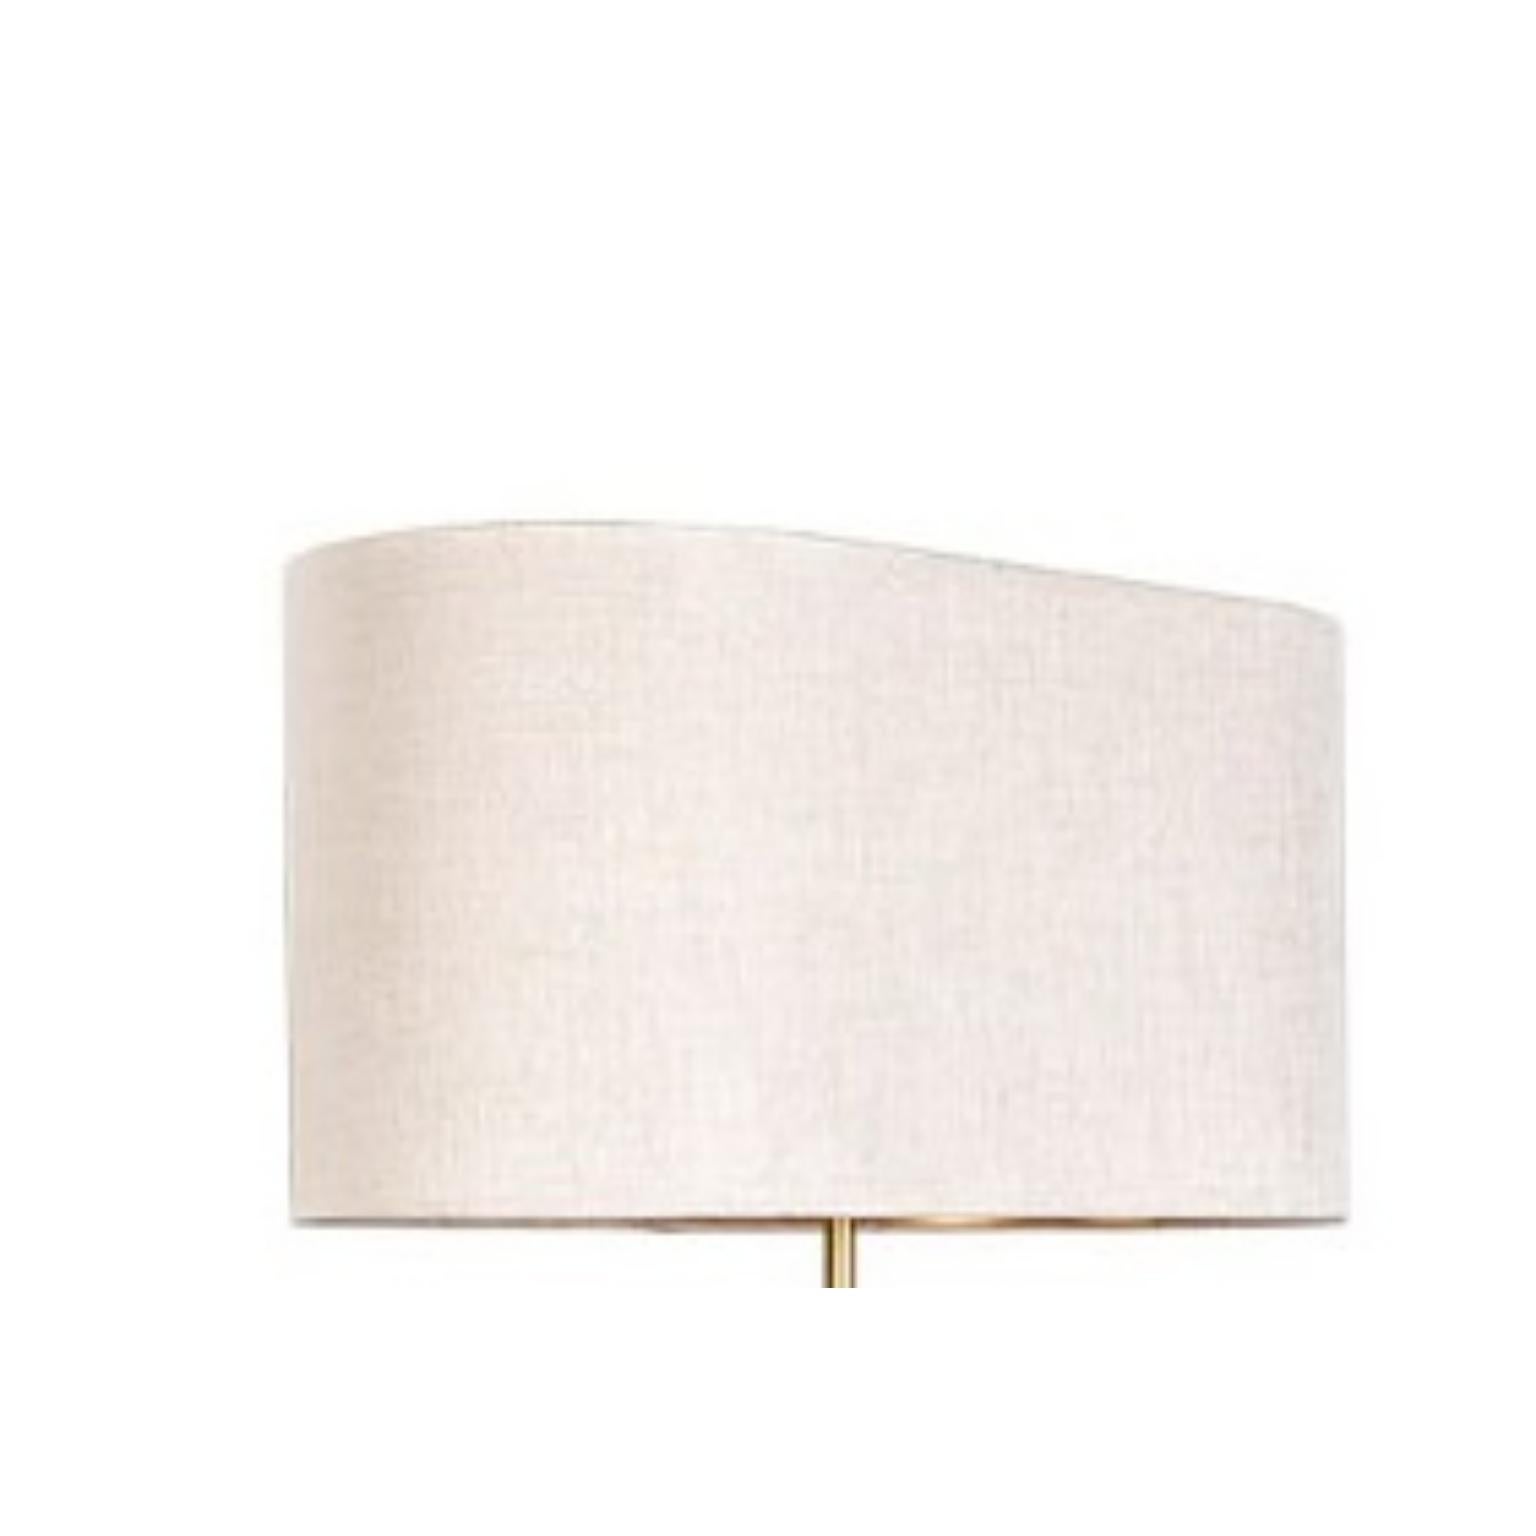 Nuit Floor Lamp by Memoir Essence
Dimensions: D 25 x W 50 x H 165 cm.
Materials: Brushed brass, high gloss lacquer and satin fabric.

Nuit Floor lamp is a classic and elegant solution for your living or bedroom. Its shaped silhouete and color